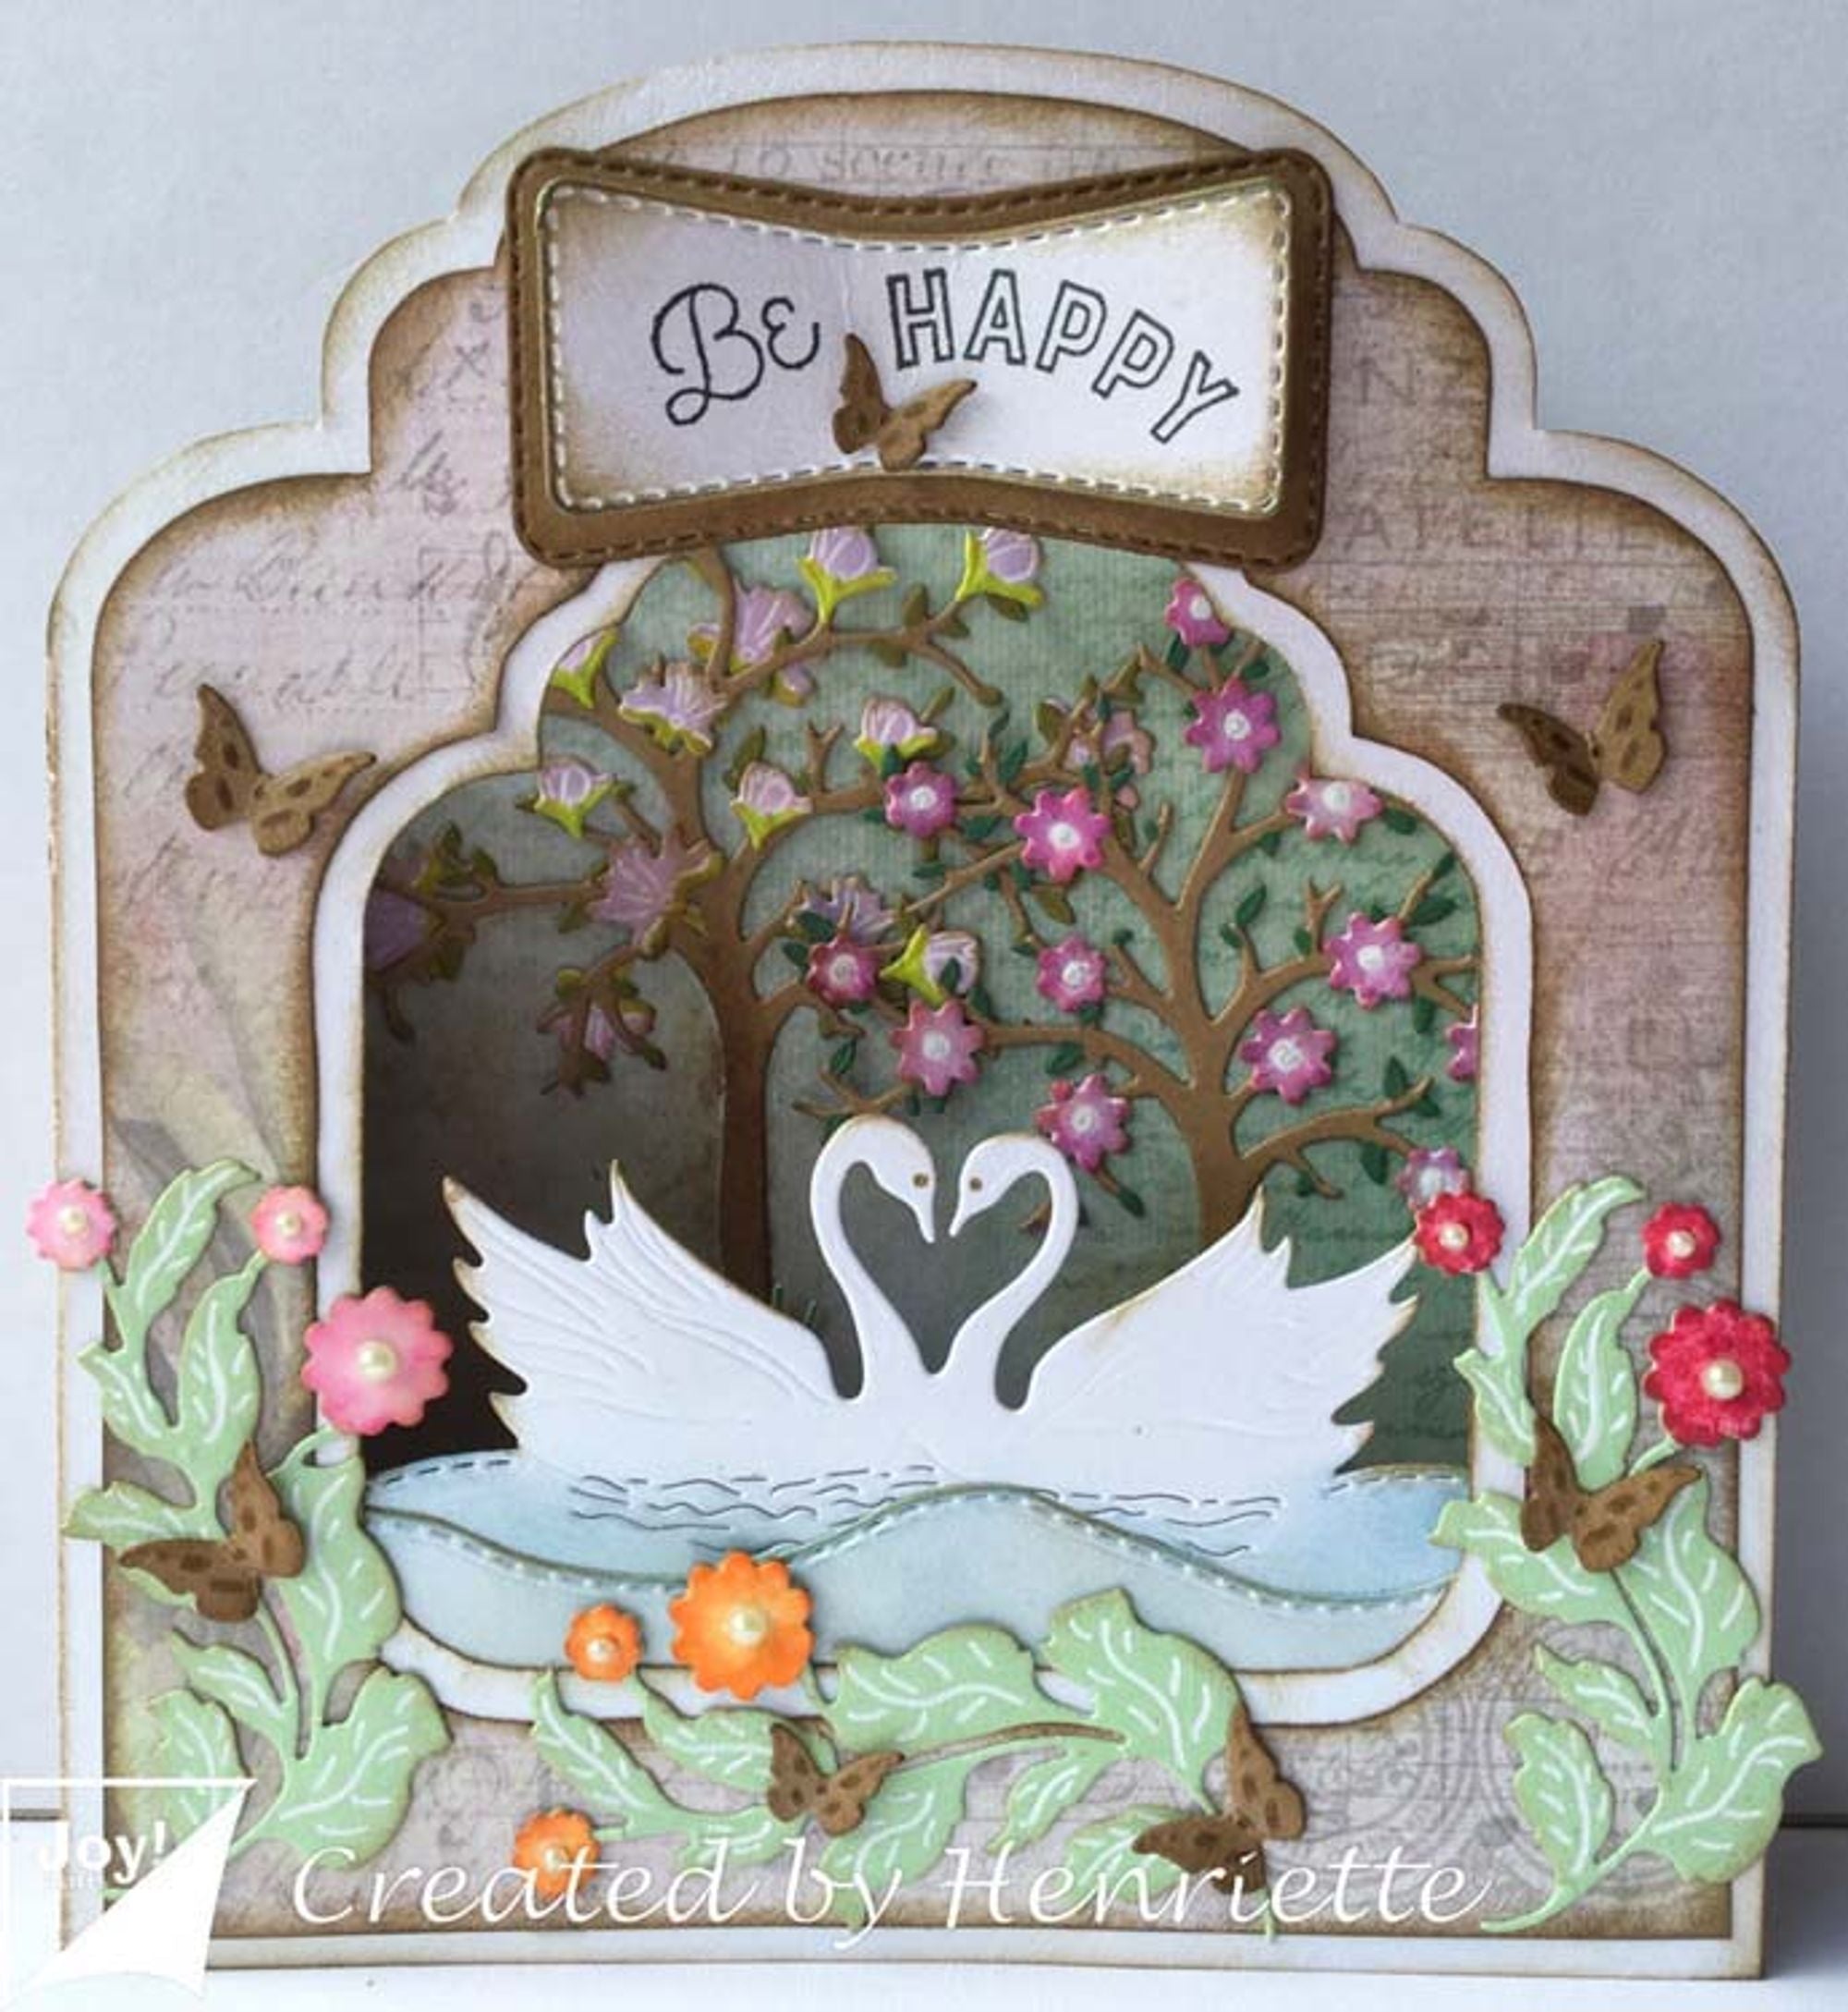 Joy! Crafts Clear Stamp -  Woodland Quotes